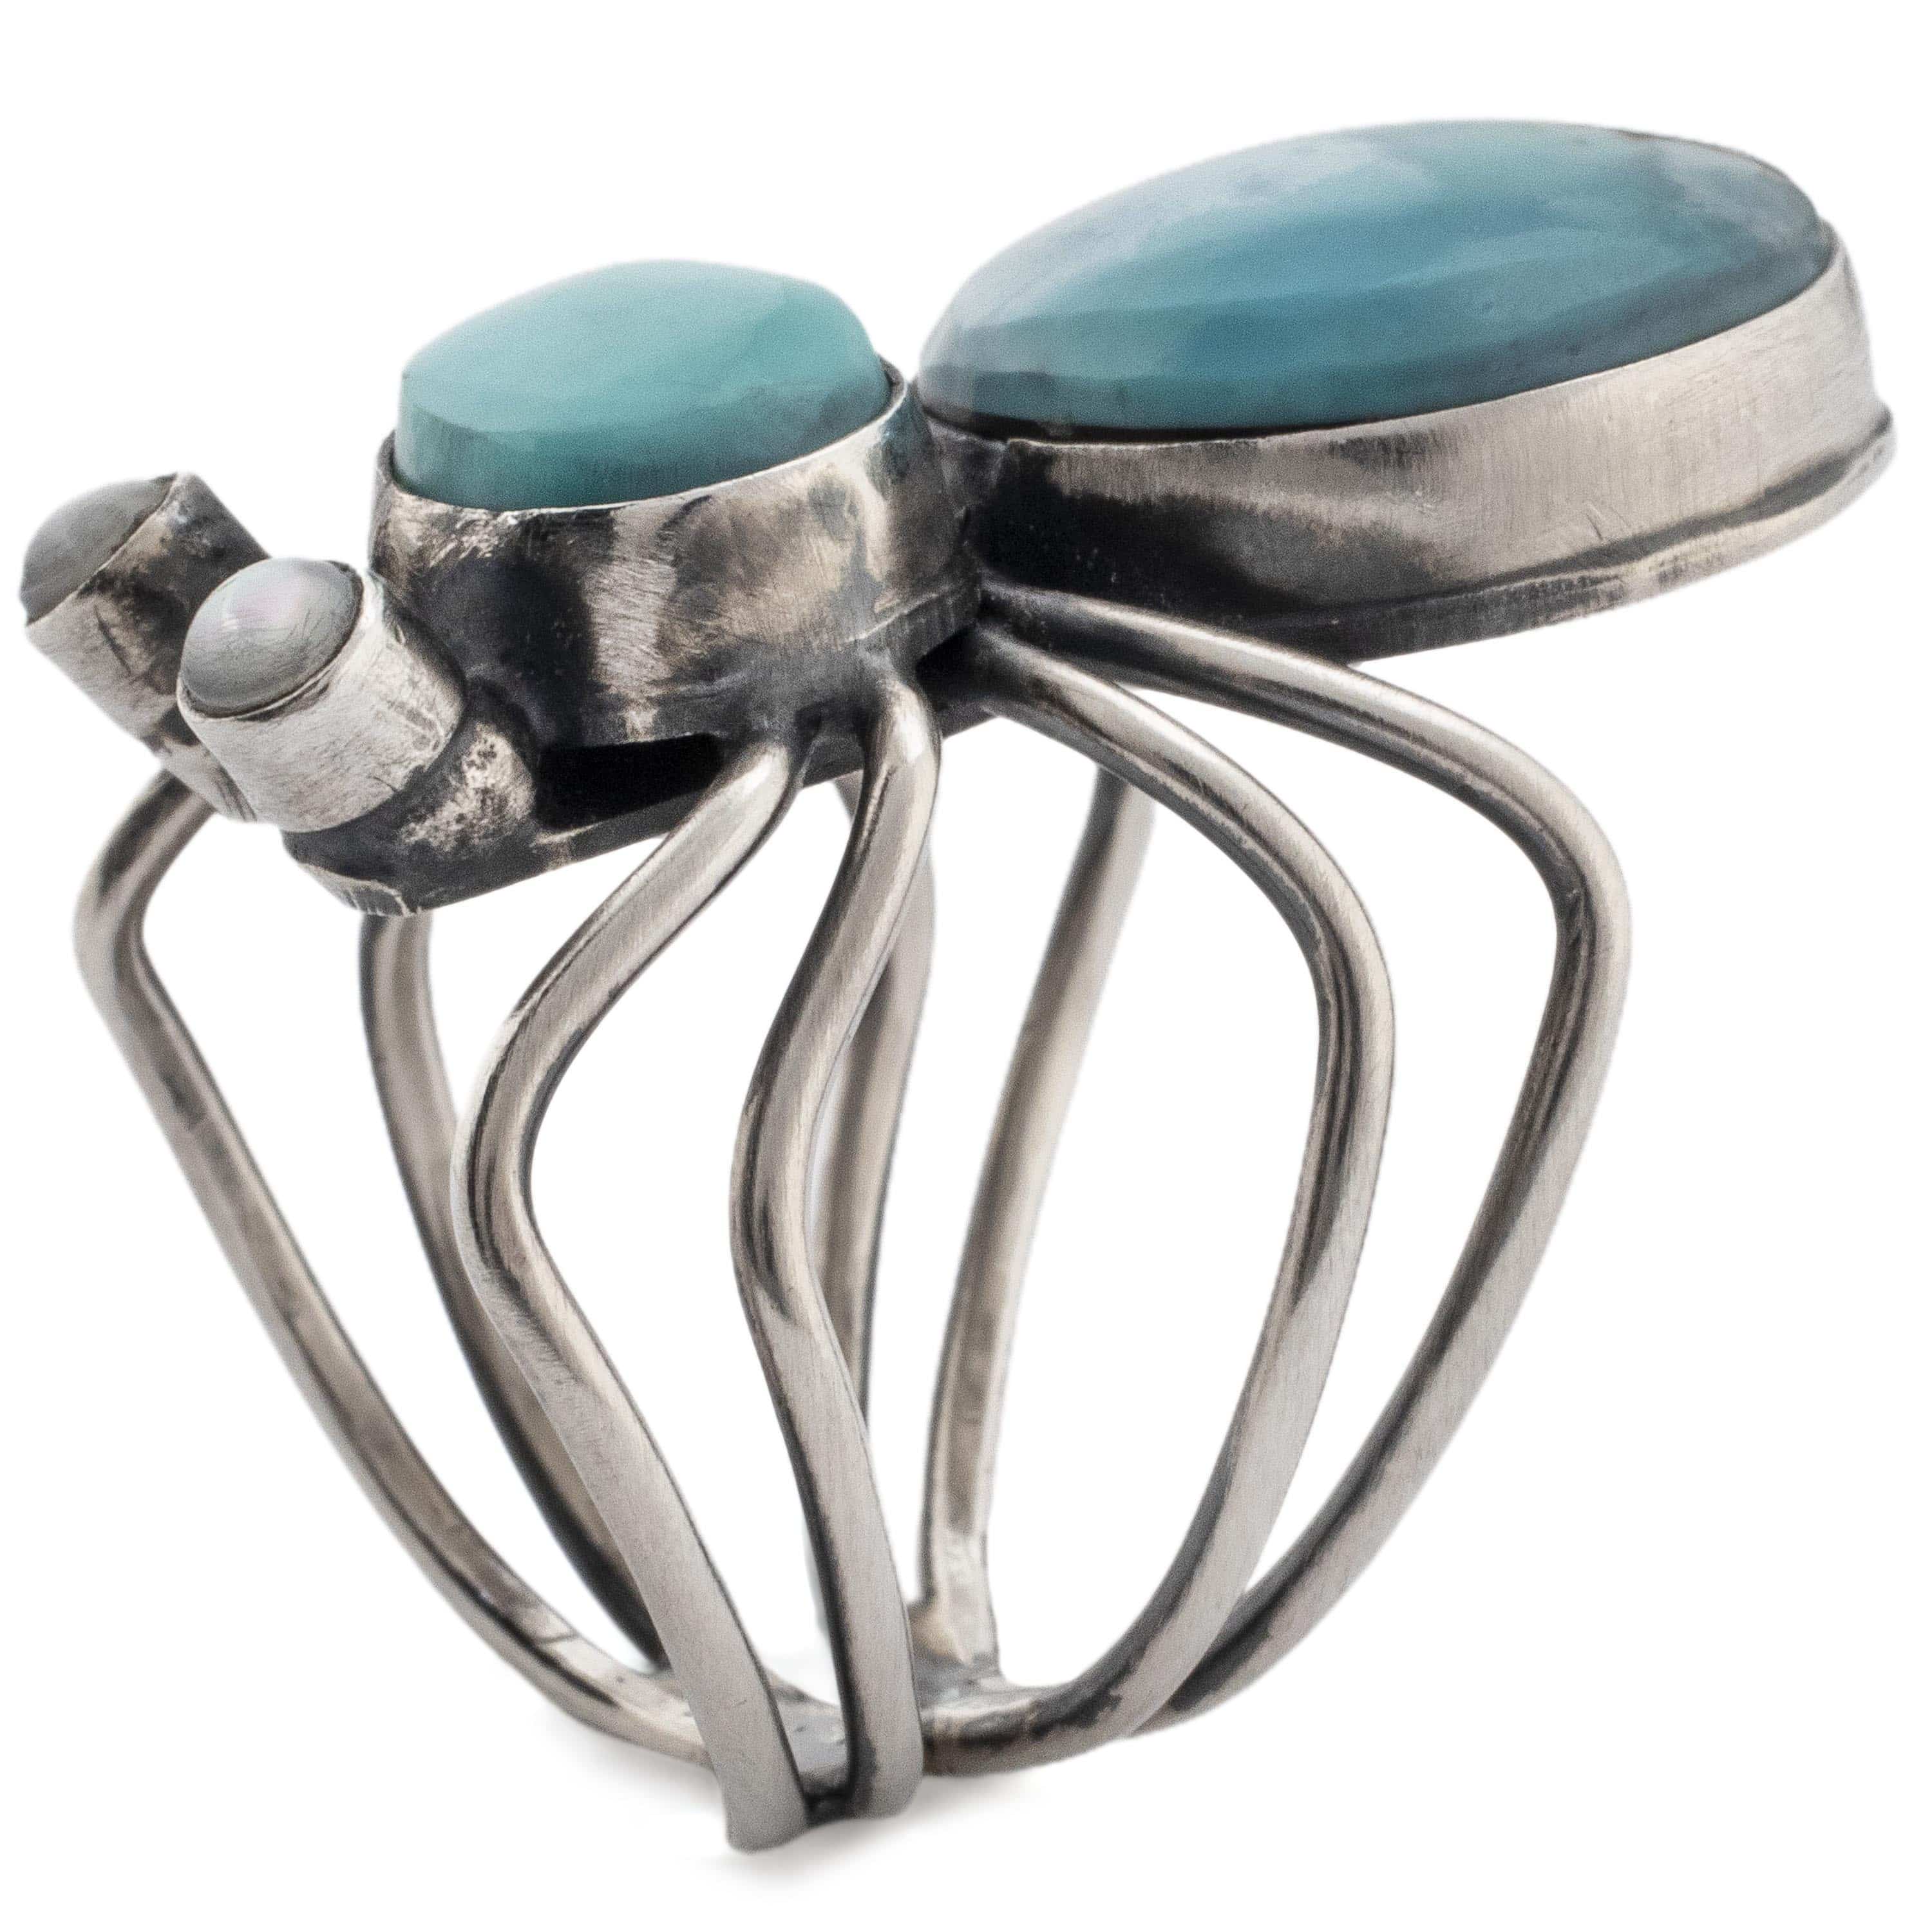 Kalifano Native American Jewelry 7 Herbert Ration Kingman Turquoise and Golden Hills Turquoise Spider USA Native American Made 925 Sterling Silver Ring NAR2400.007.7